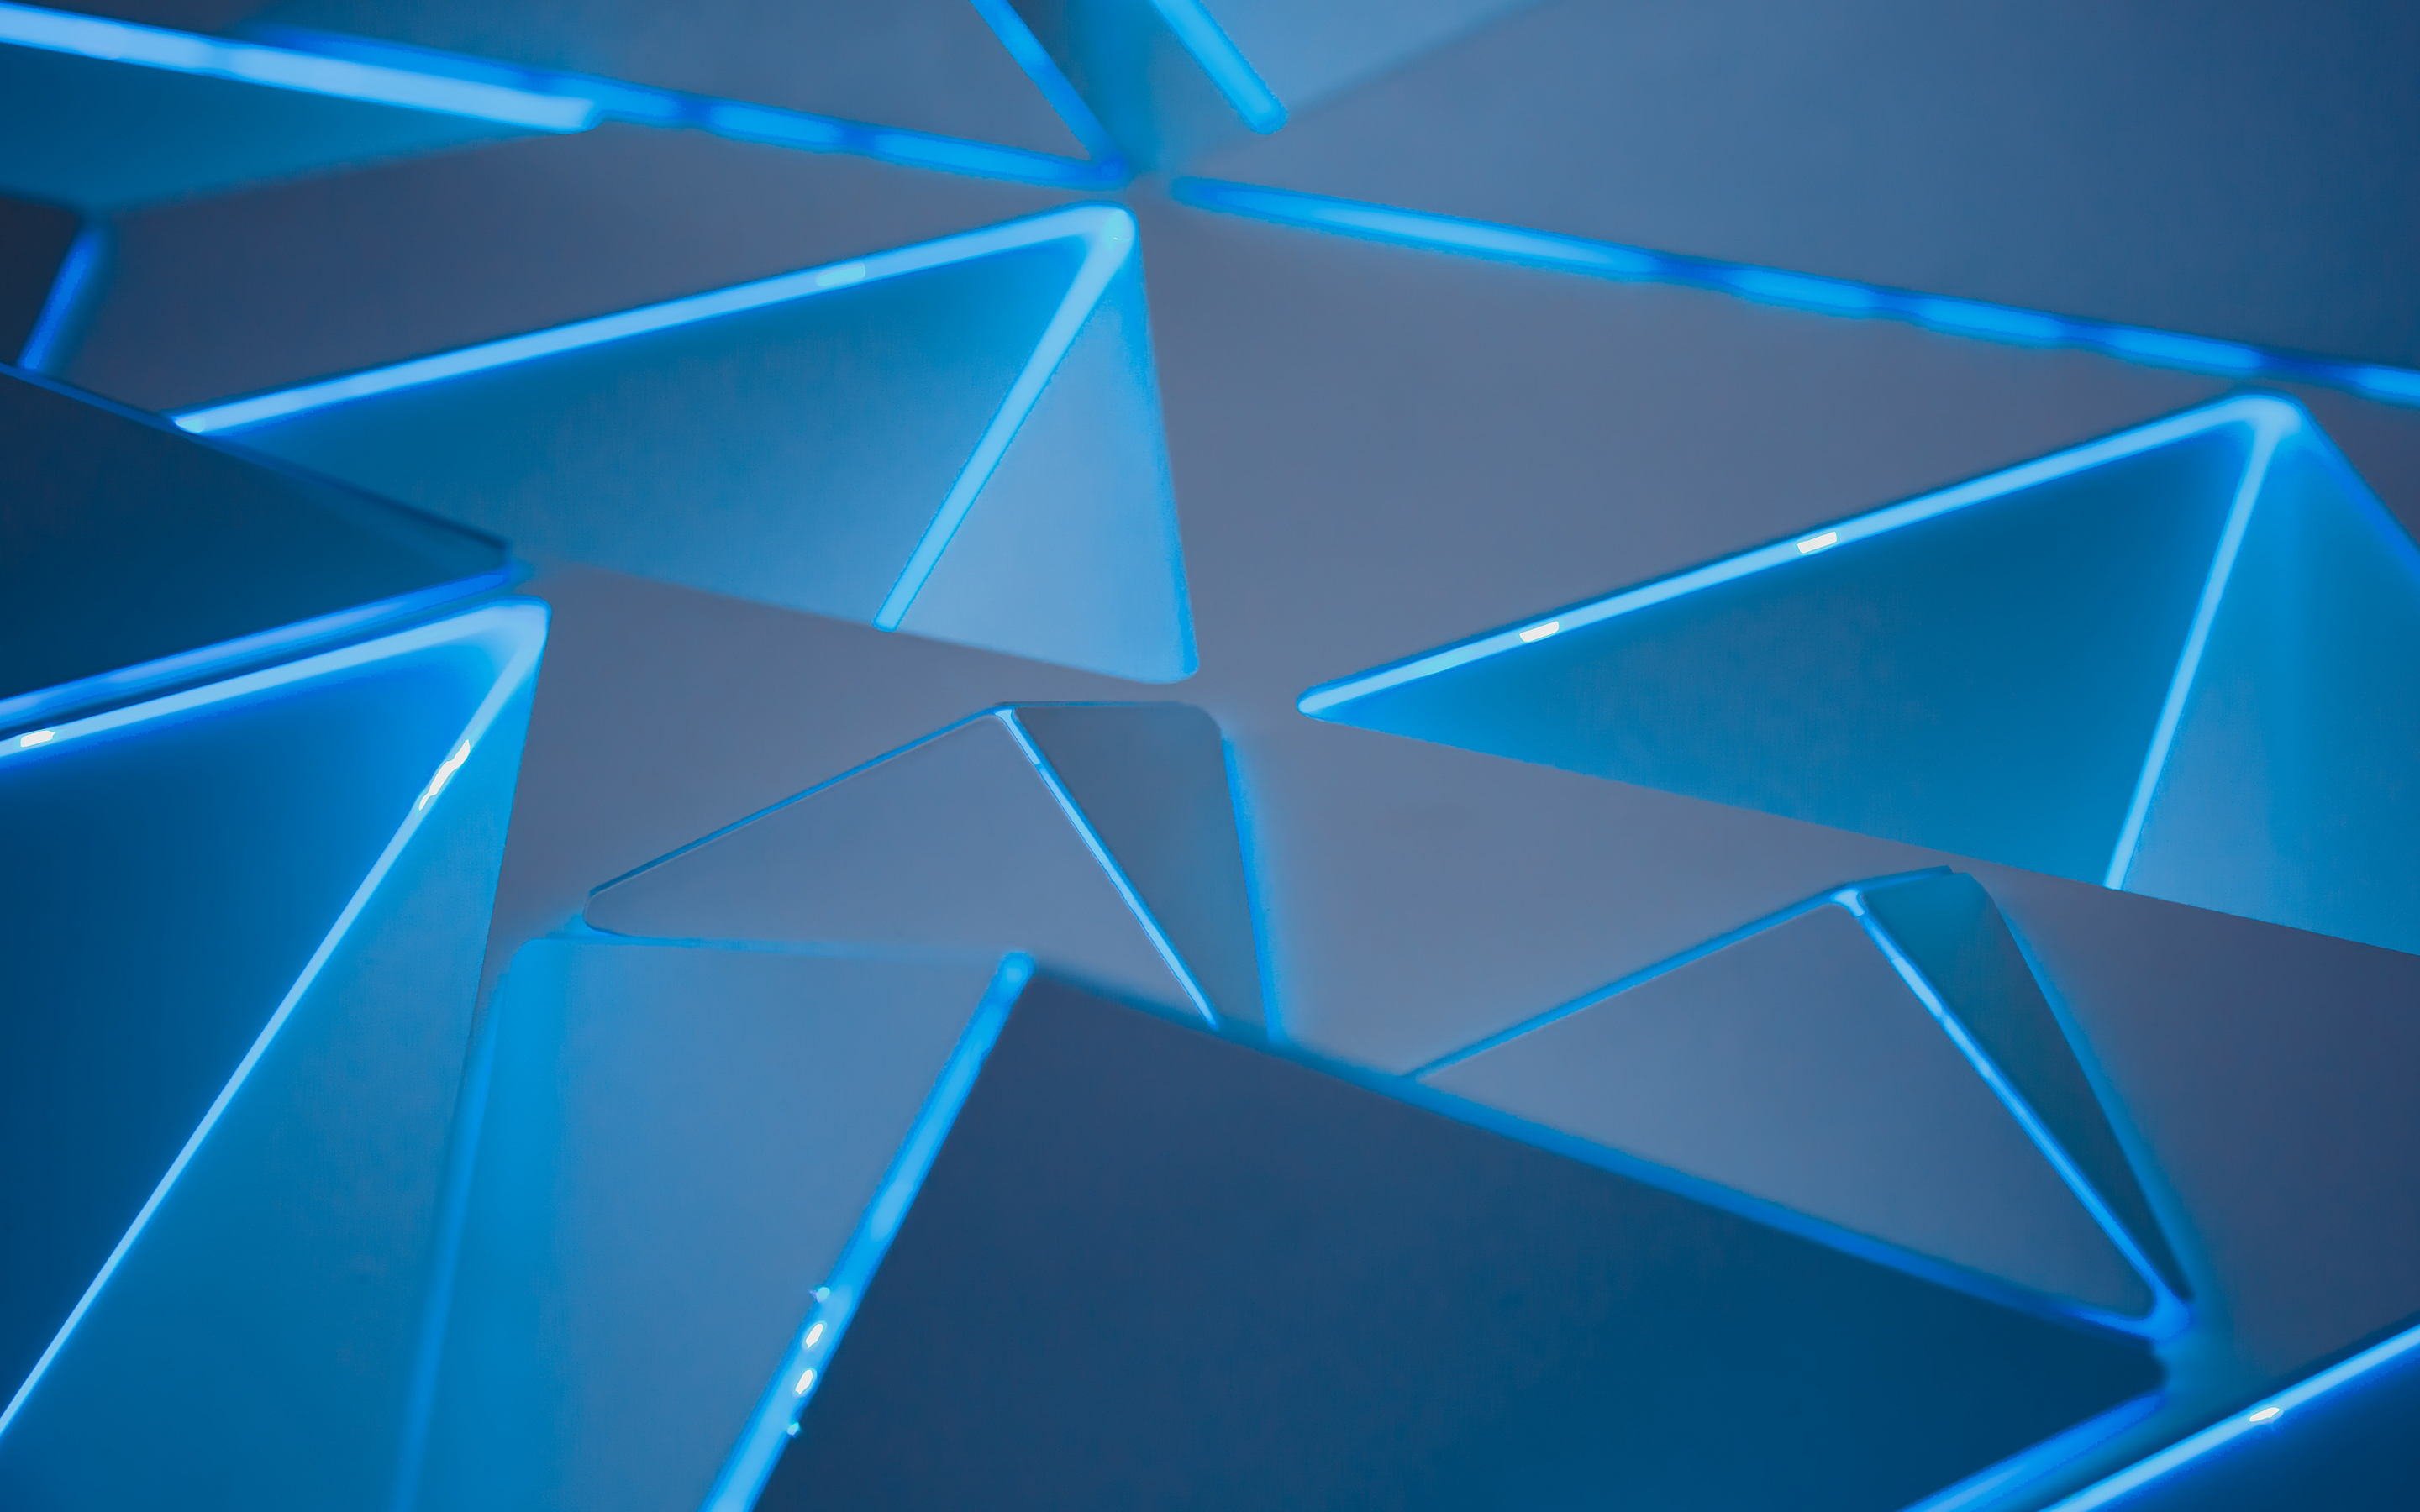 Blue, pyramids, triangles, abstract, 2880x1800 wallpaper